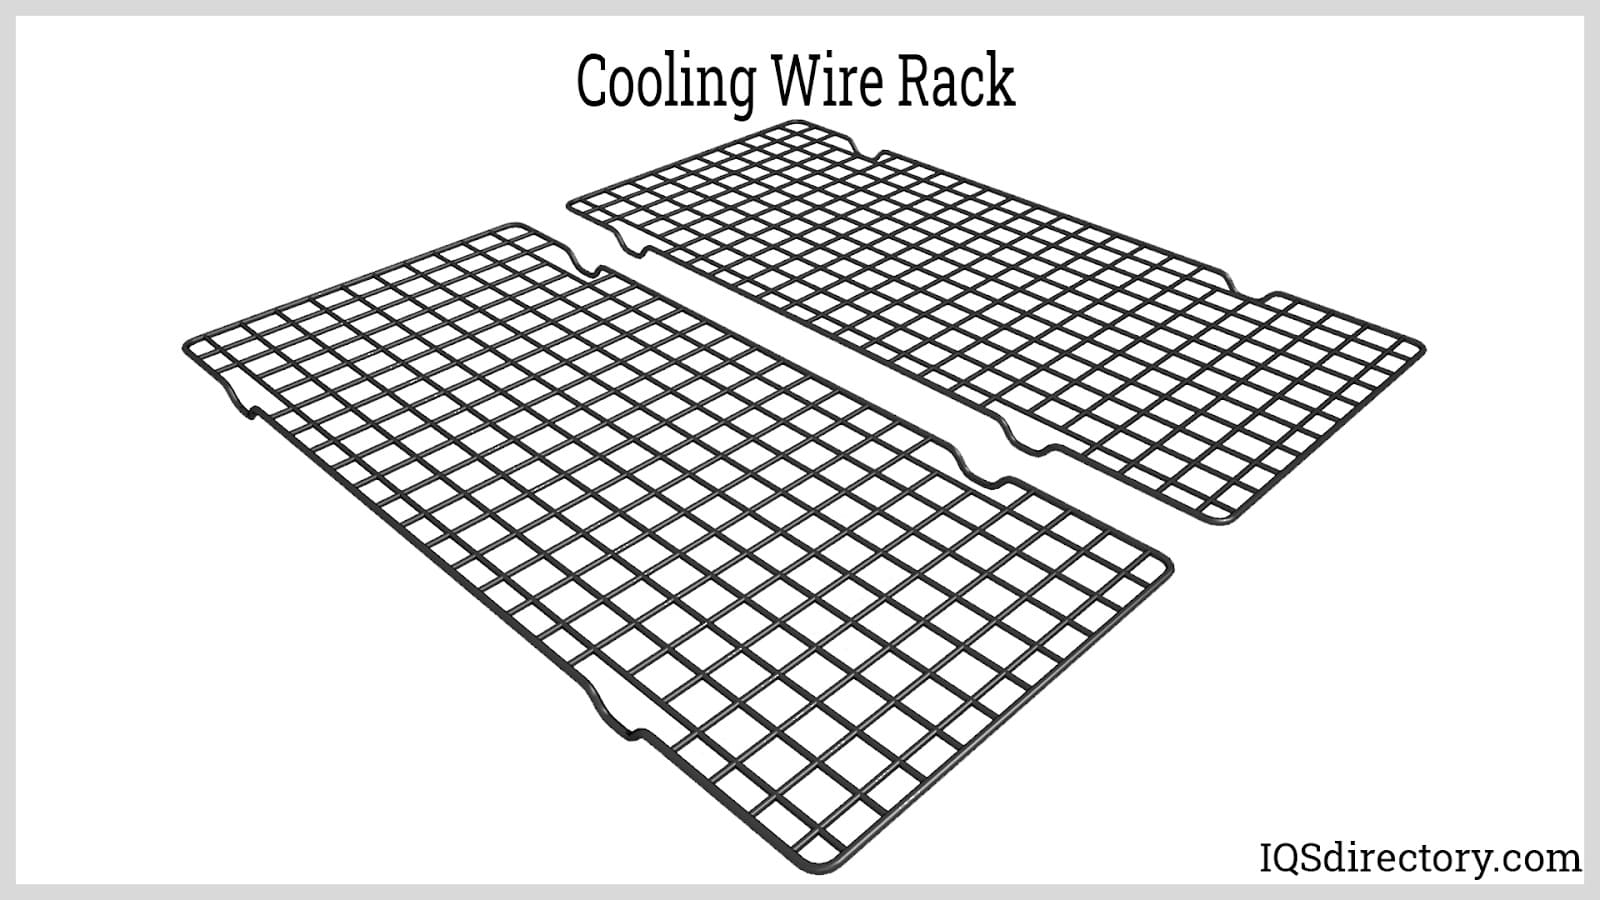 https://www.iqsdirectory.com/articles/wire-form/wire-racks/cooling-wire-rack.jpg